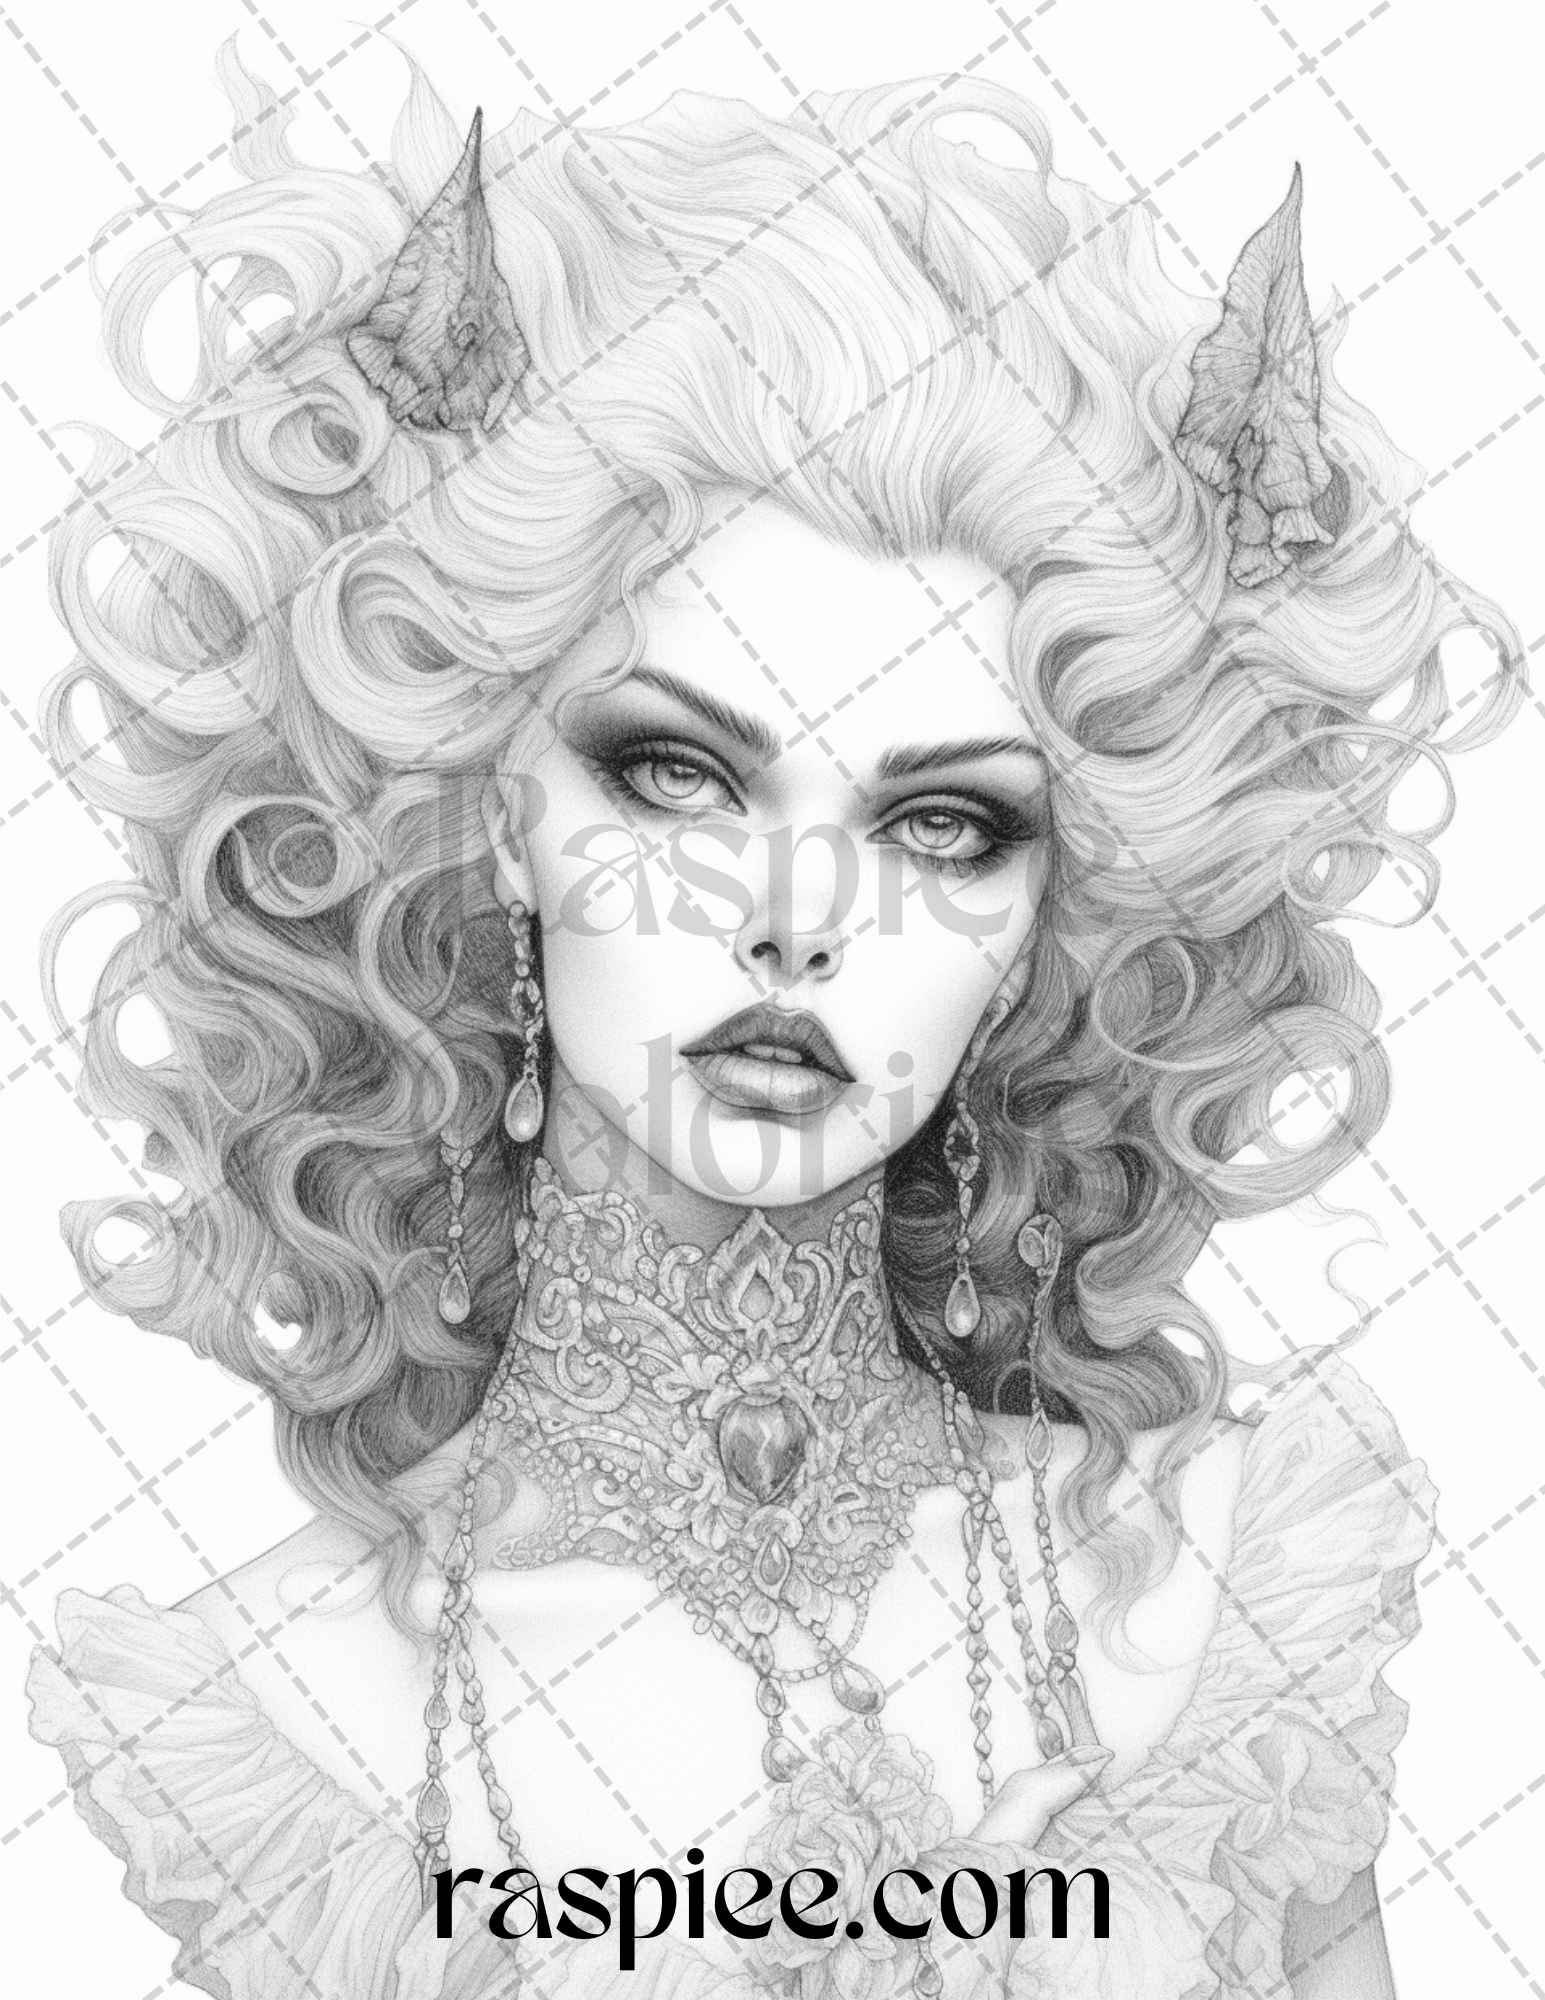 Grayscale Vampire Girls Coloring Book Set 1 30 Printable Adult Coloring  Pages Download Grayscale Illustration Printable PDF File AI 